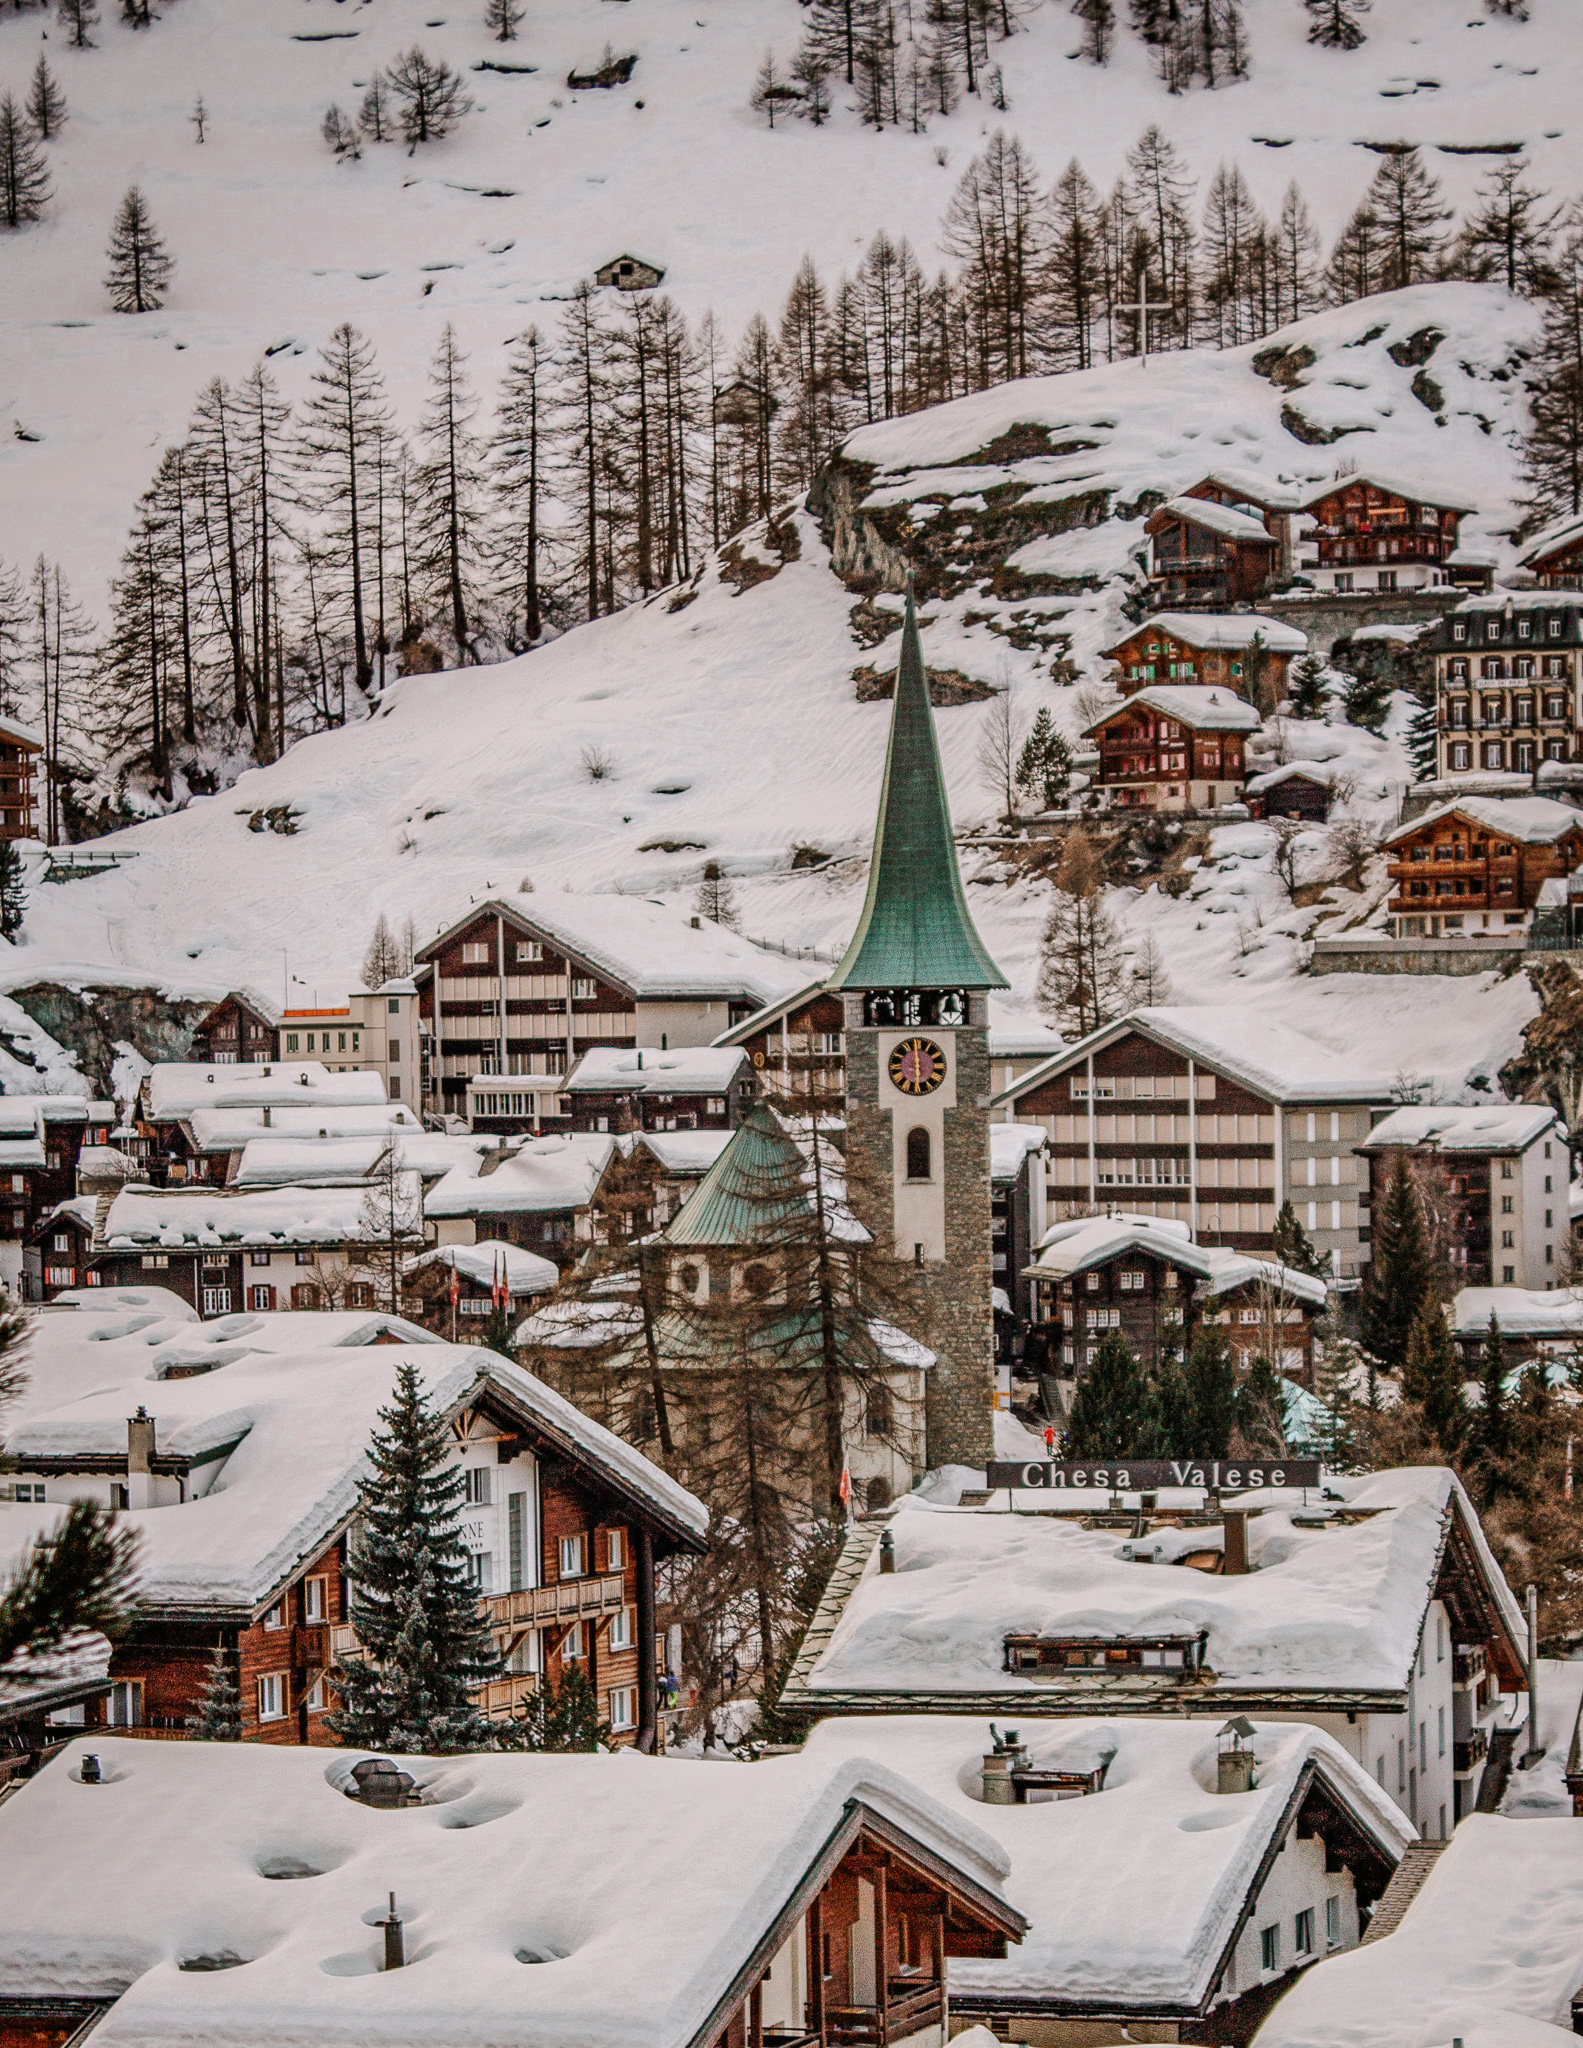 View of Zermatt during Christmas from above with Zermatt church and surrounding wooden chalets covered in snow, with bare trees on the mountain beyond.